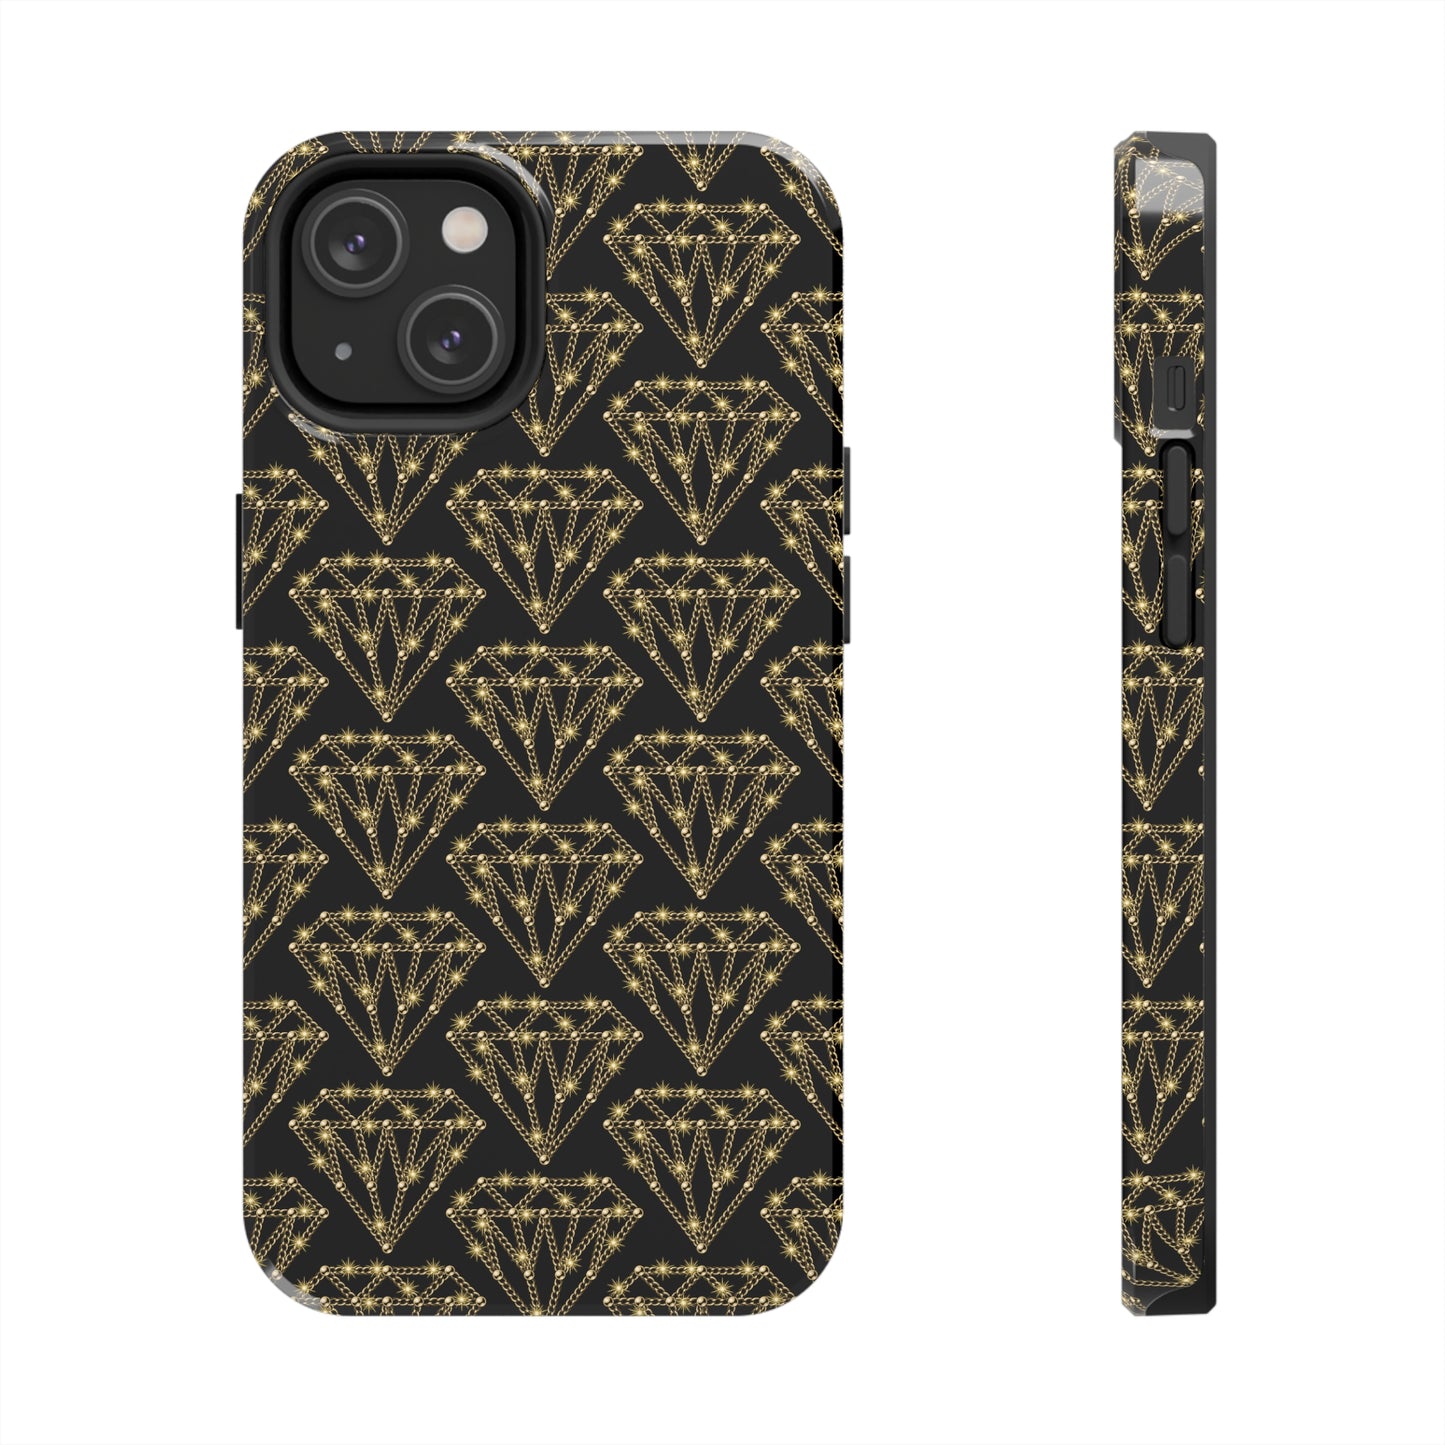 All iPhone Models: Diamonds Are A Girls Best Friend Tough Phone Cases